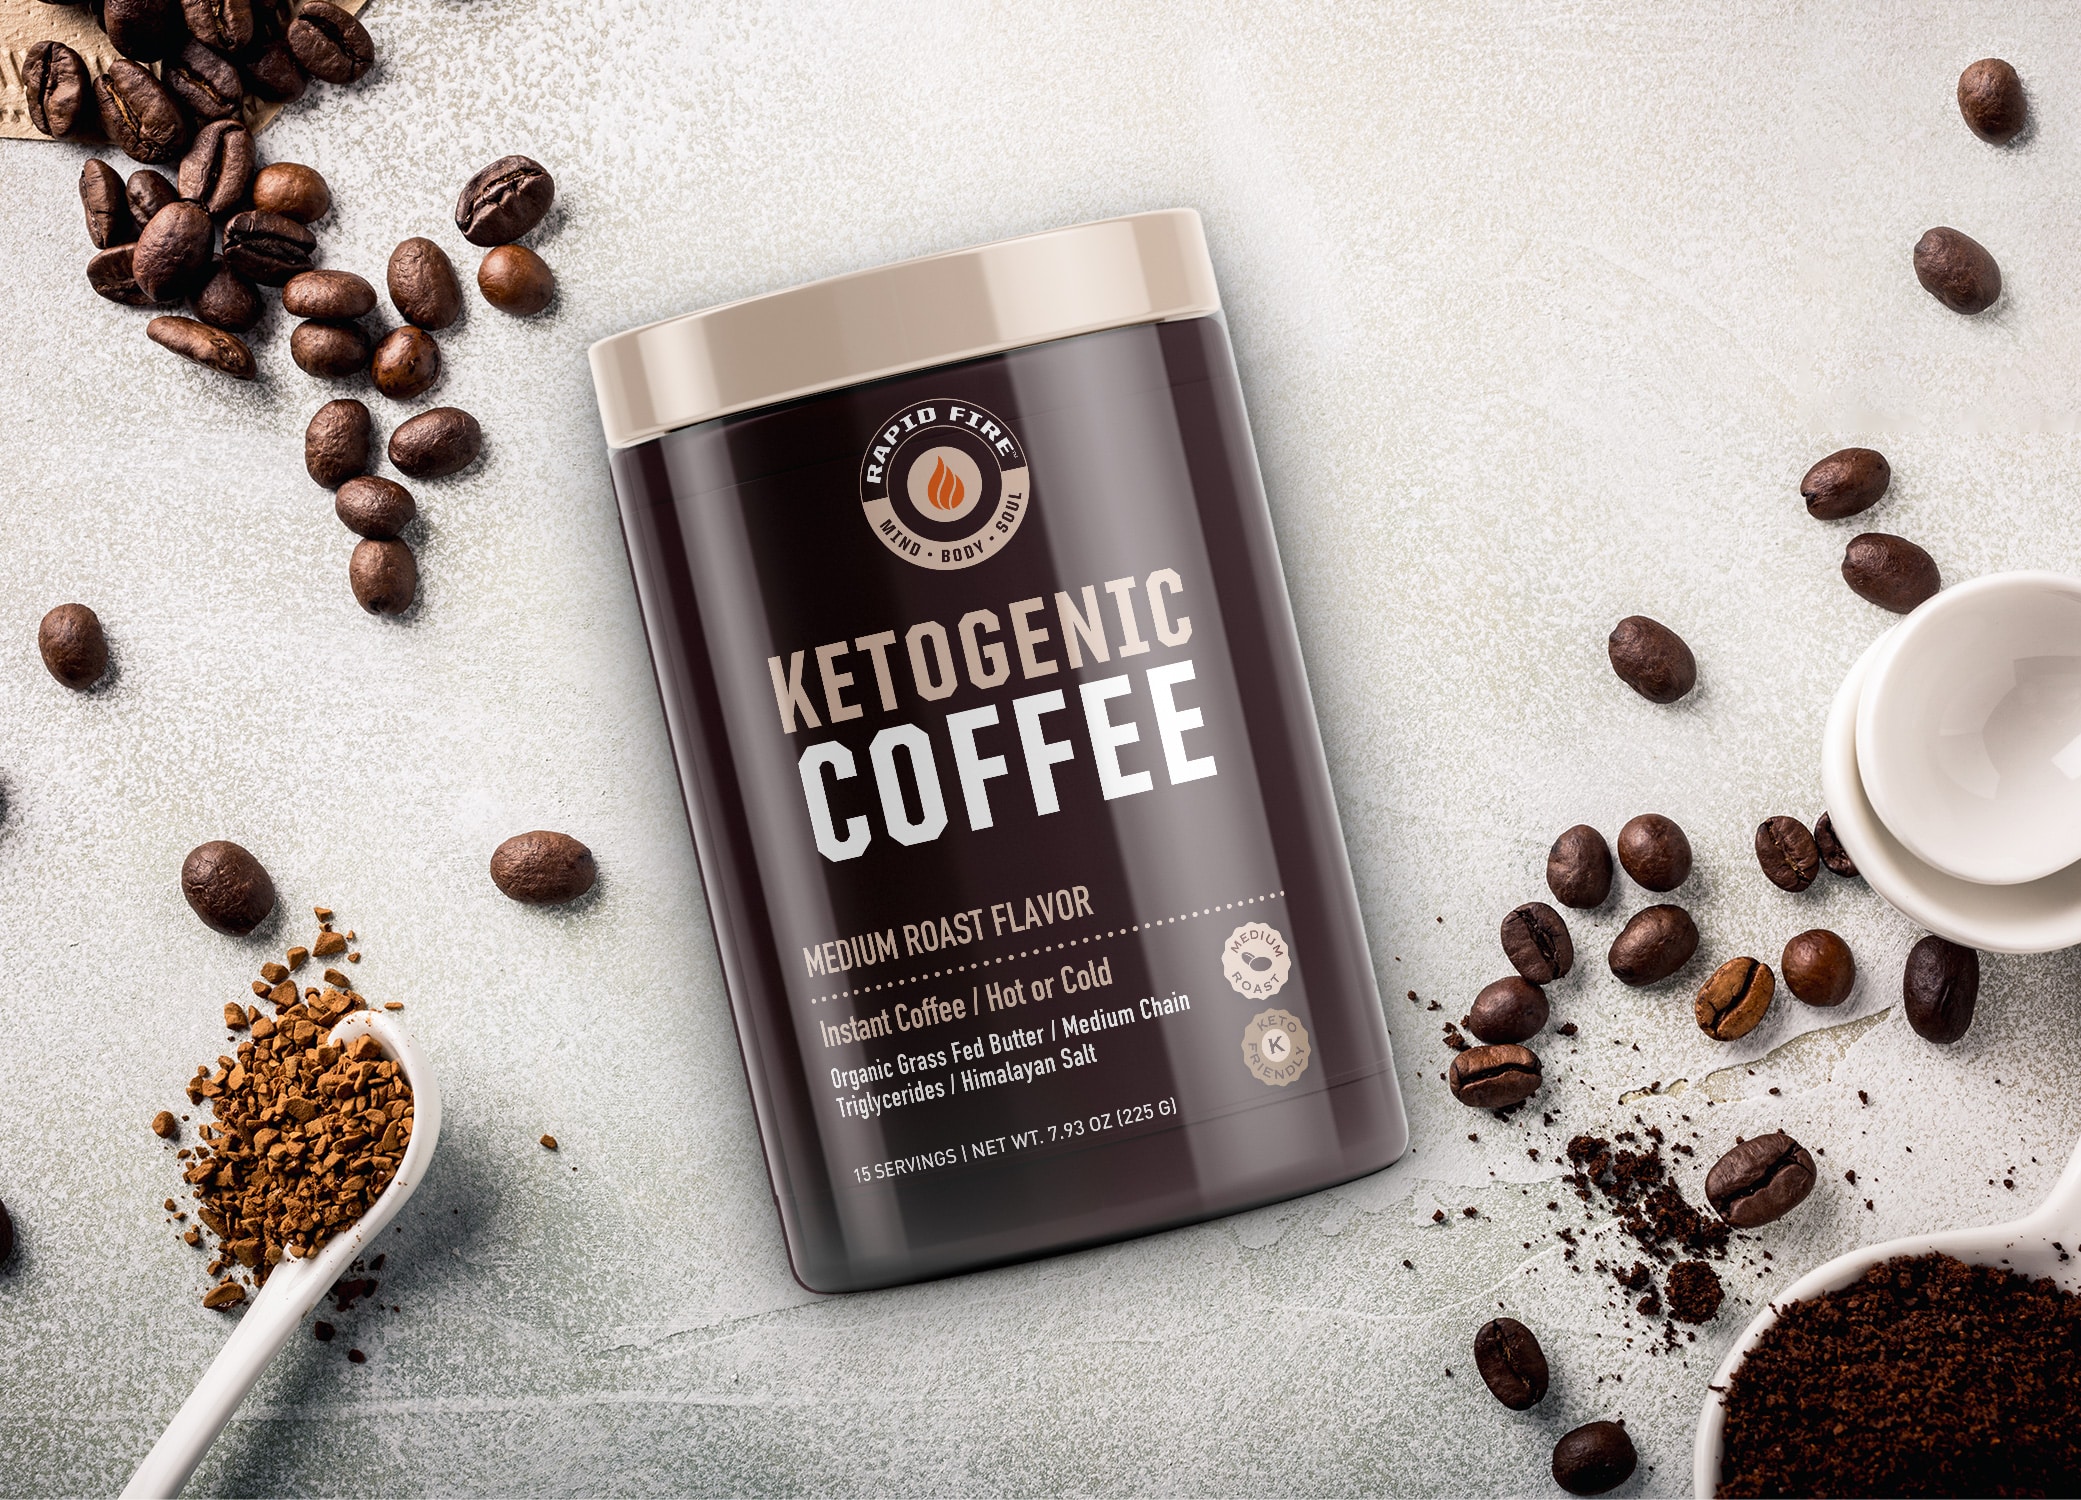 Rapid Fire ketogenic coffee medium roast flavor packaging design with coffee beans surrounding the container on a light stone background.